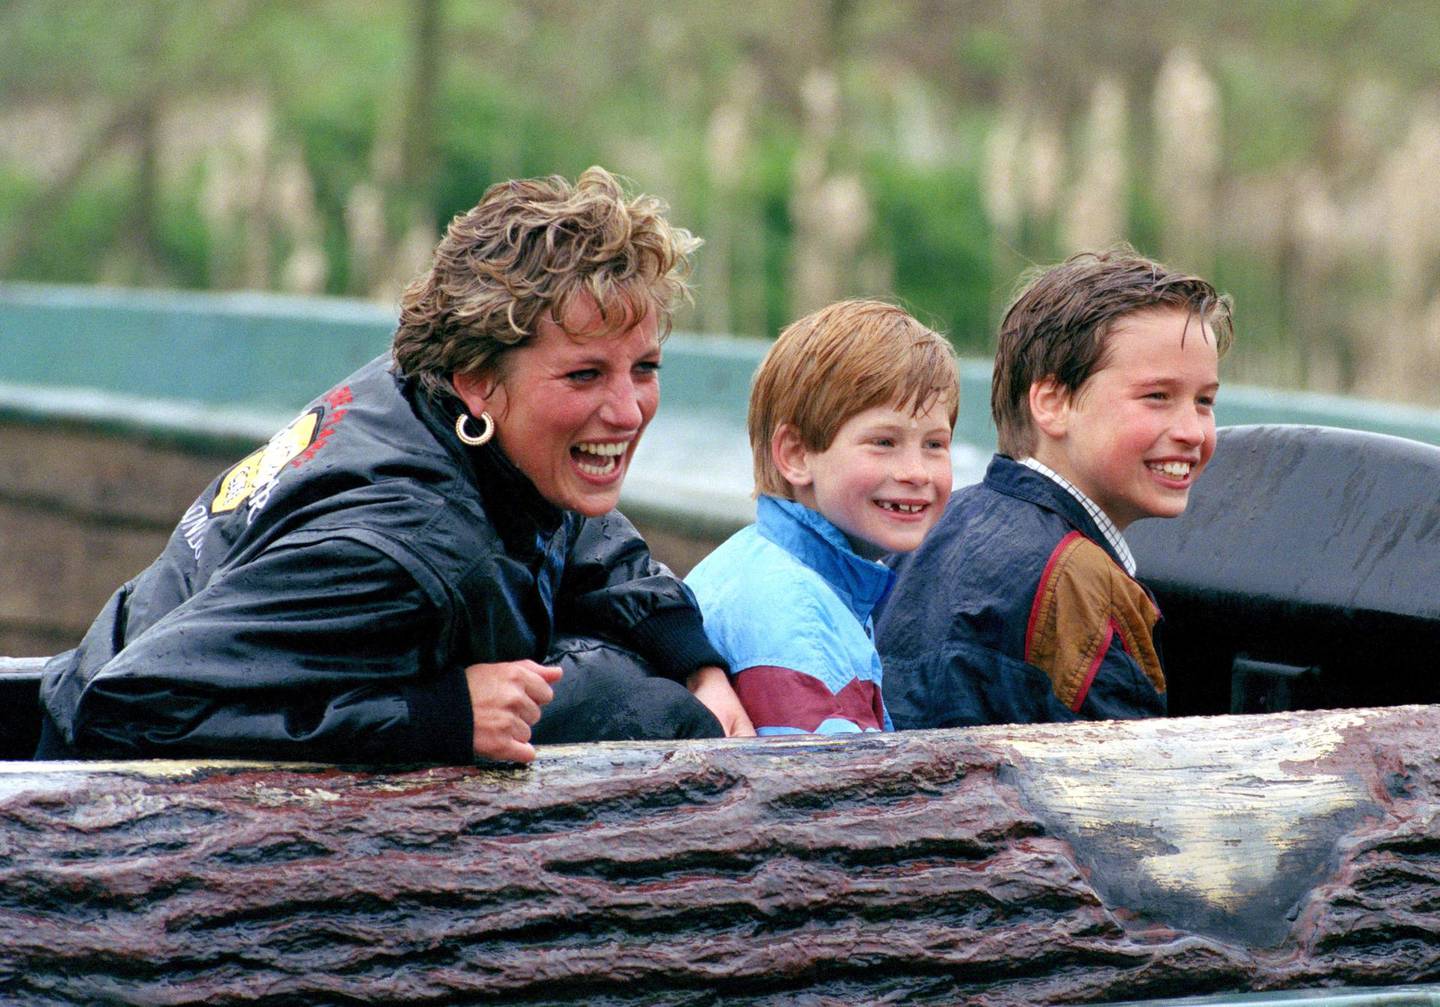 Princess Diana of Wales, Prince William and Prince Harry visit 'Thorpe Park' amusement park.  (Photo by Julian Parker/UK Press via Getty Images)